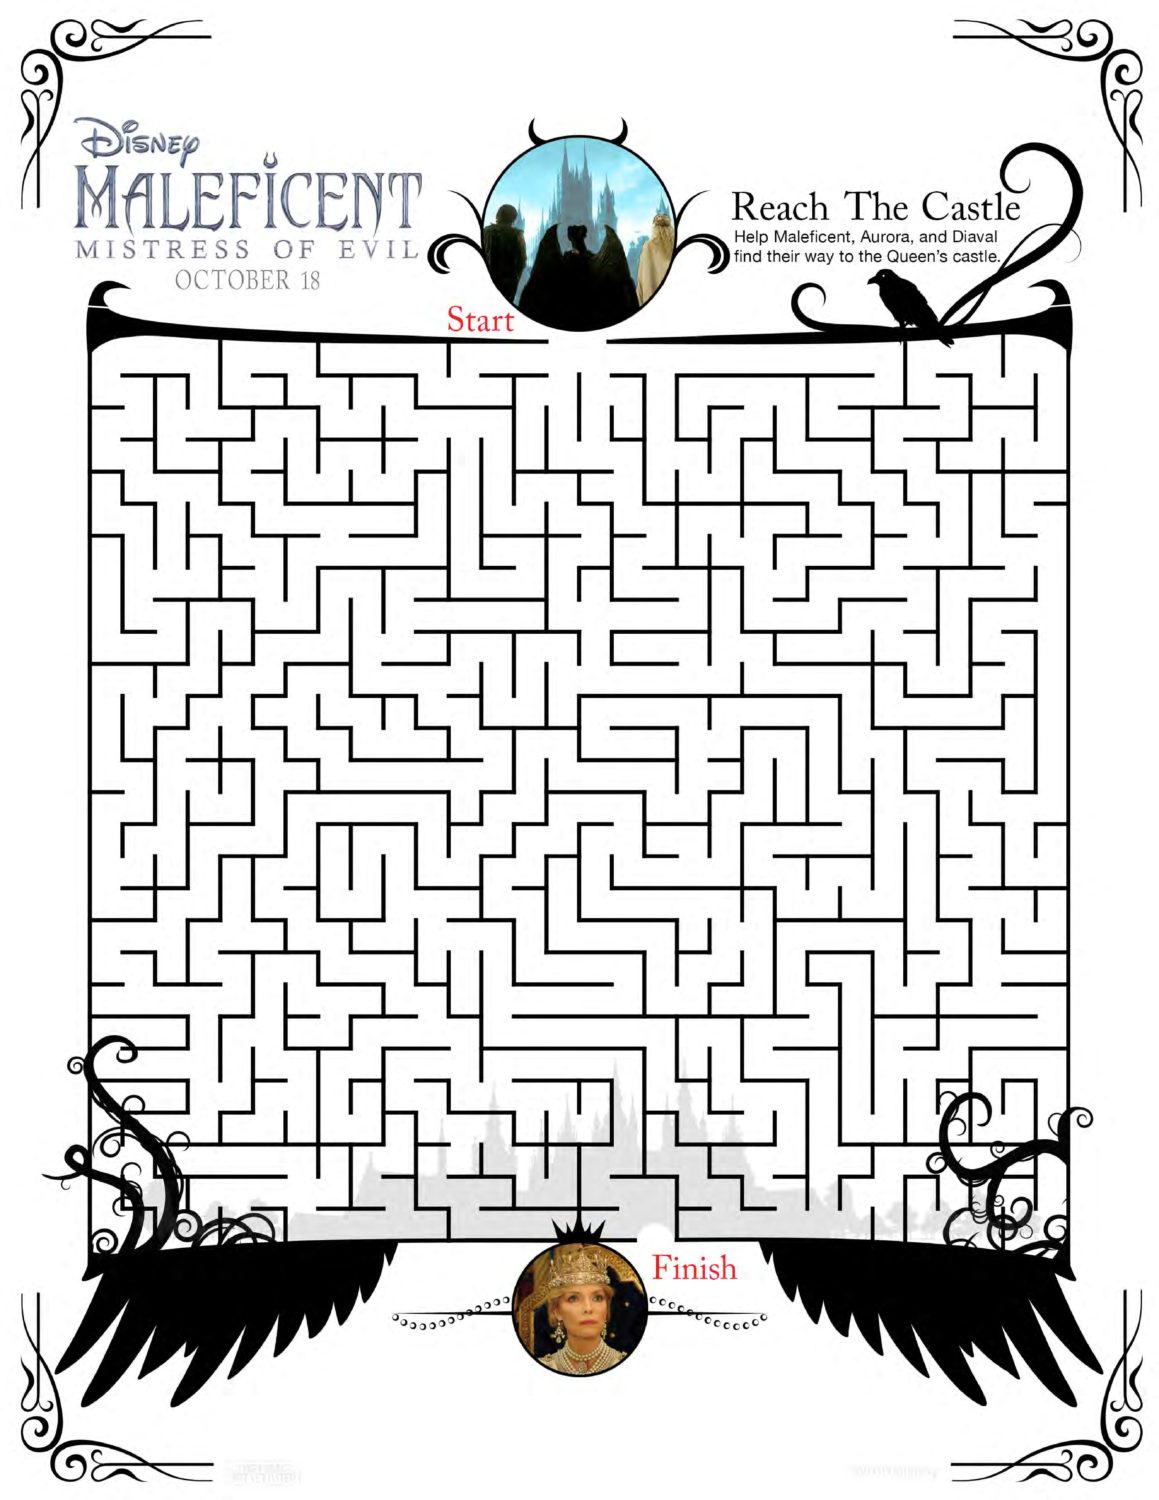 Maleficent 2 Reach the Castle Maze Activity Sheet and Coloring Pages